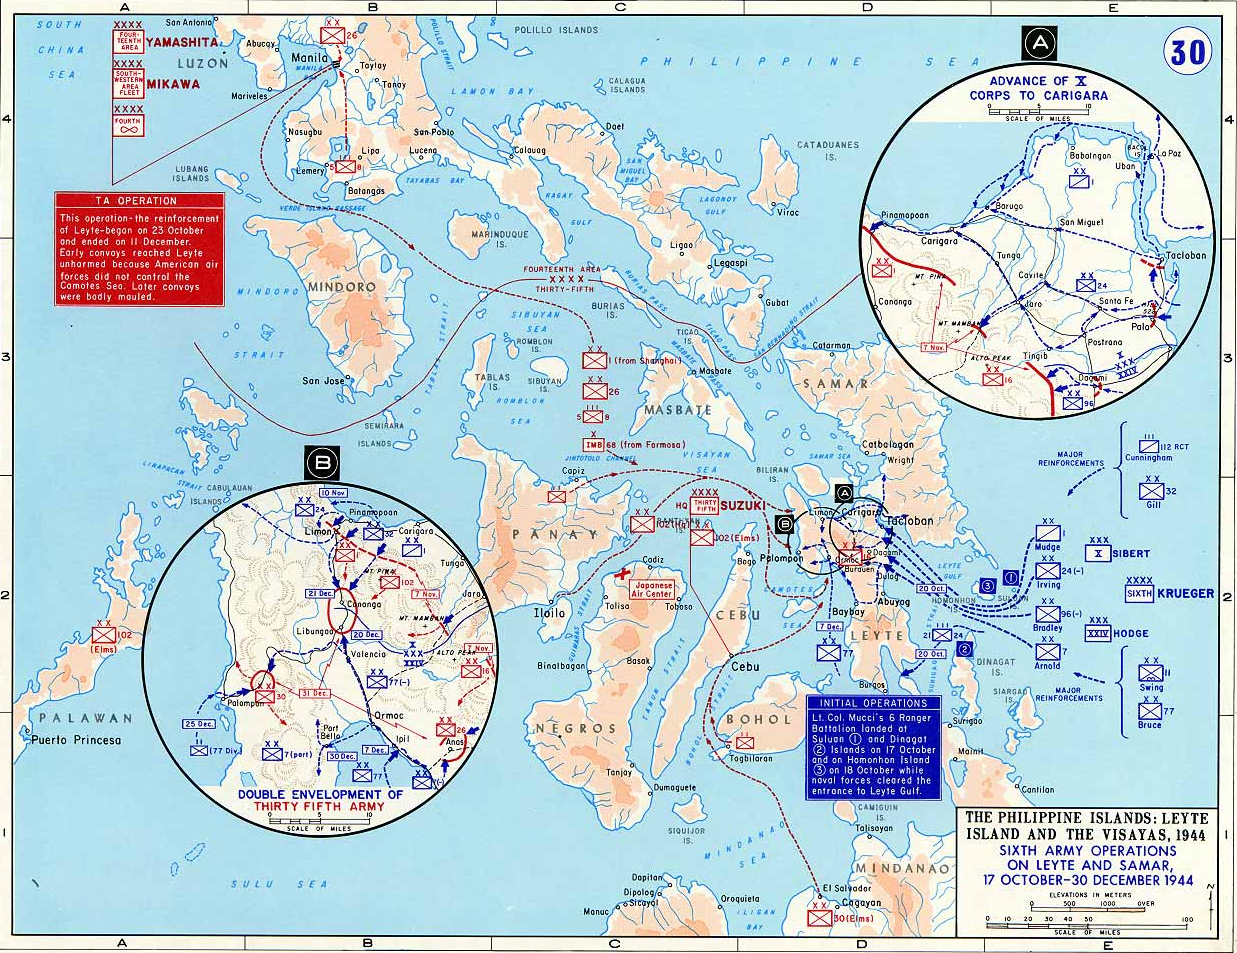 Map of World War II: The Philippine Islands: Leyte Island and the Visayas. Sixth Army Operations on Leyte and Samar, October 17 - December 30, 1944.